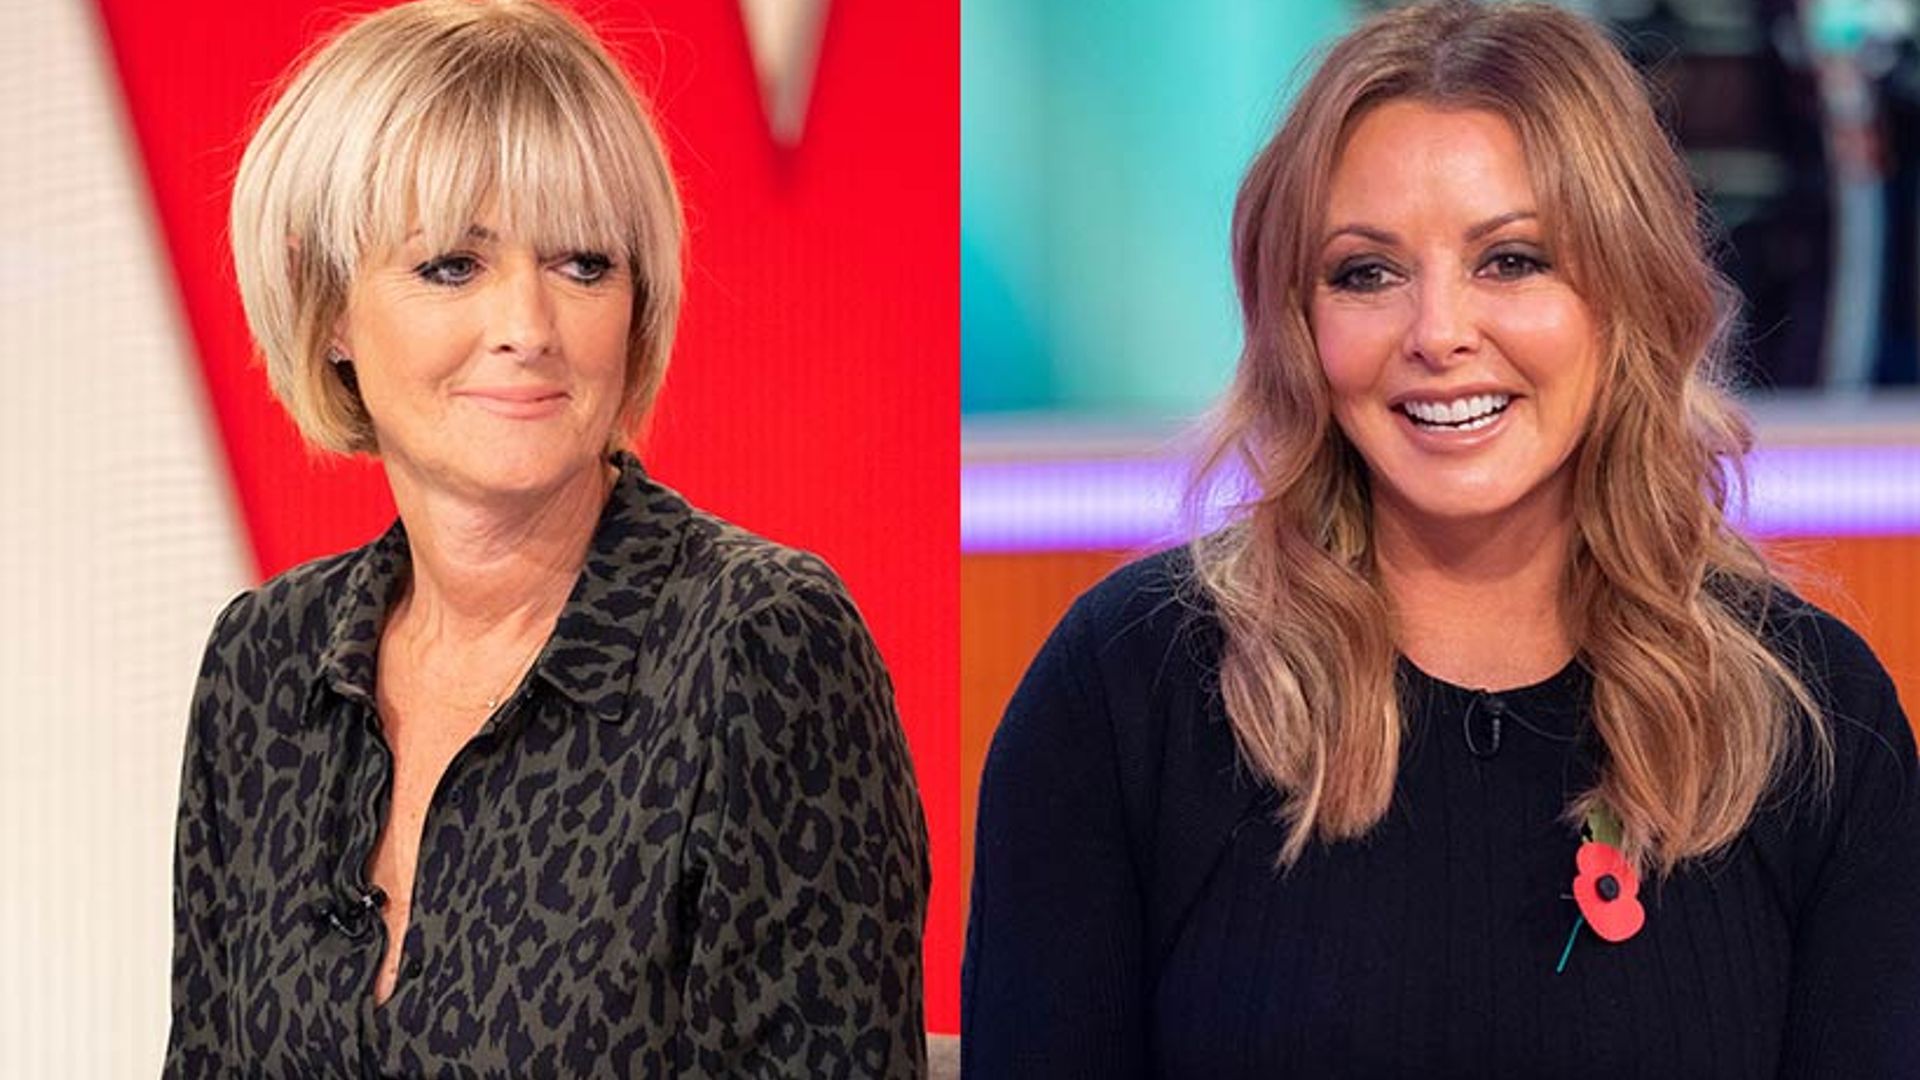 The £35 Marks & Spencer dress that Carol Vorderman and Jane Moore can't get enough of